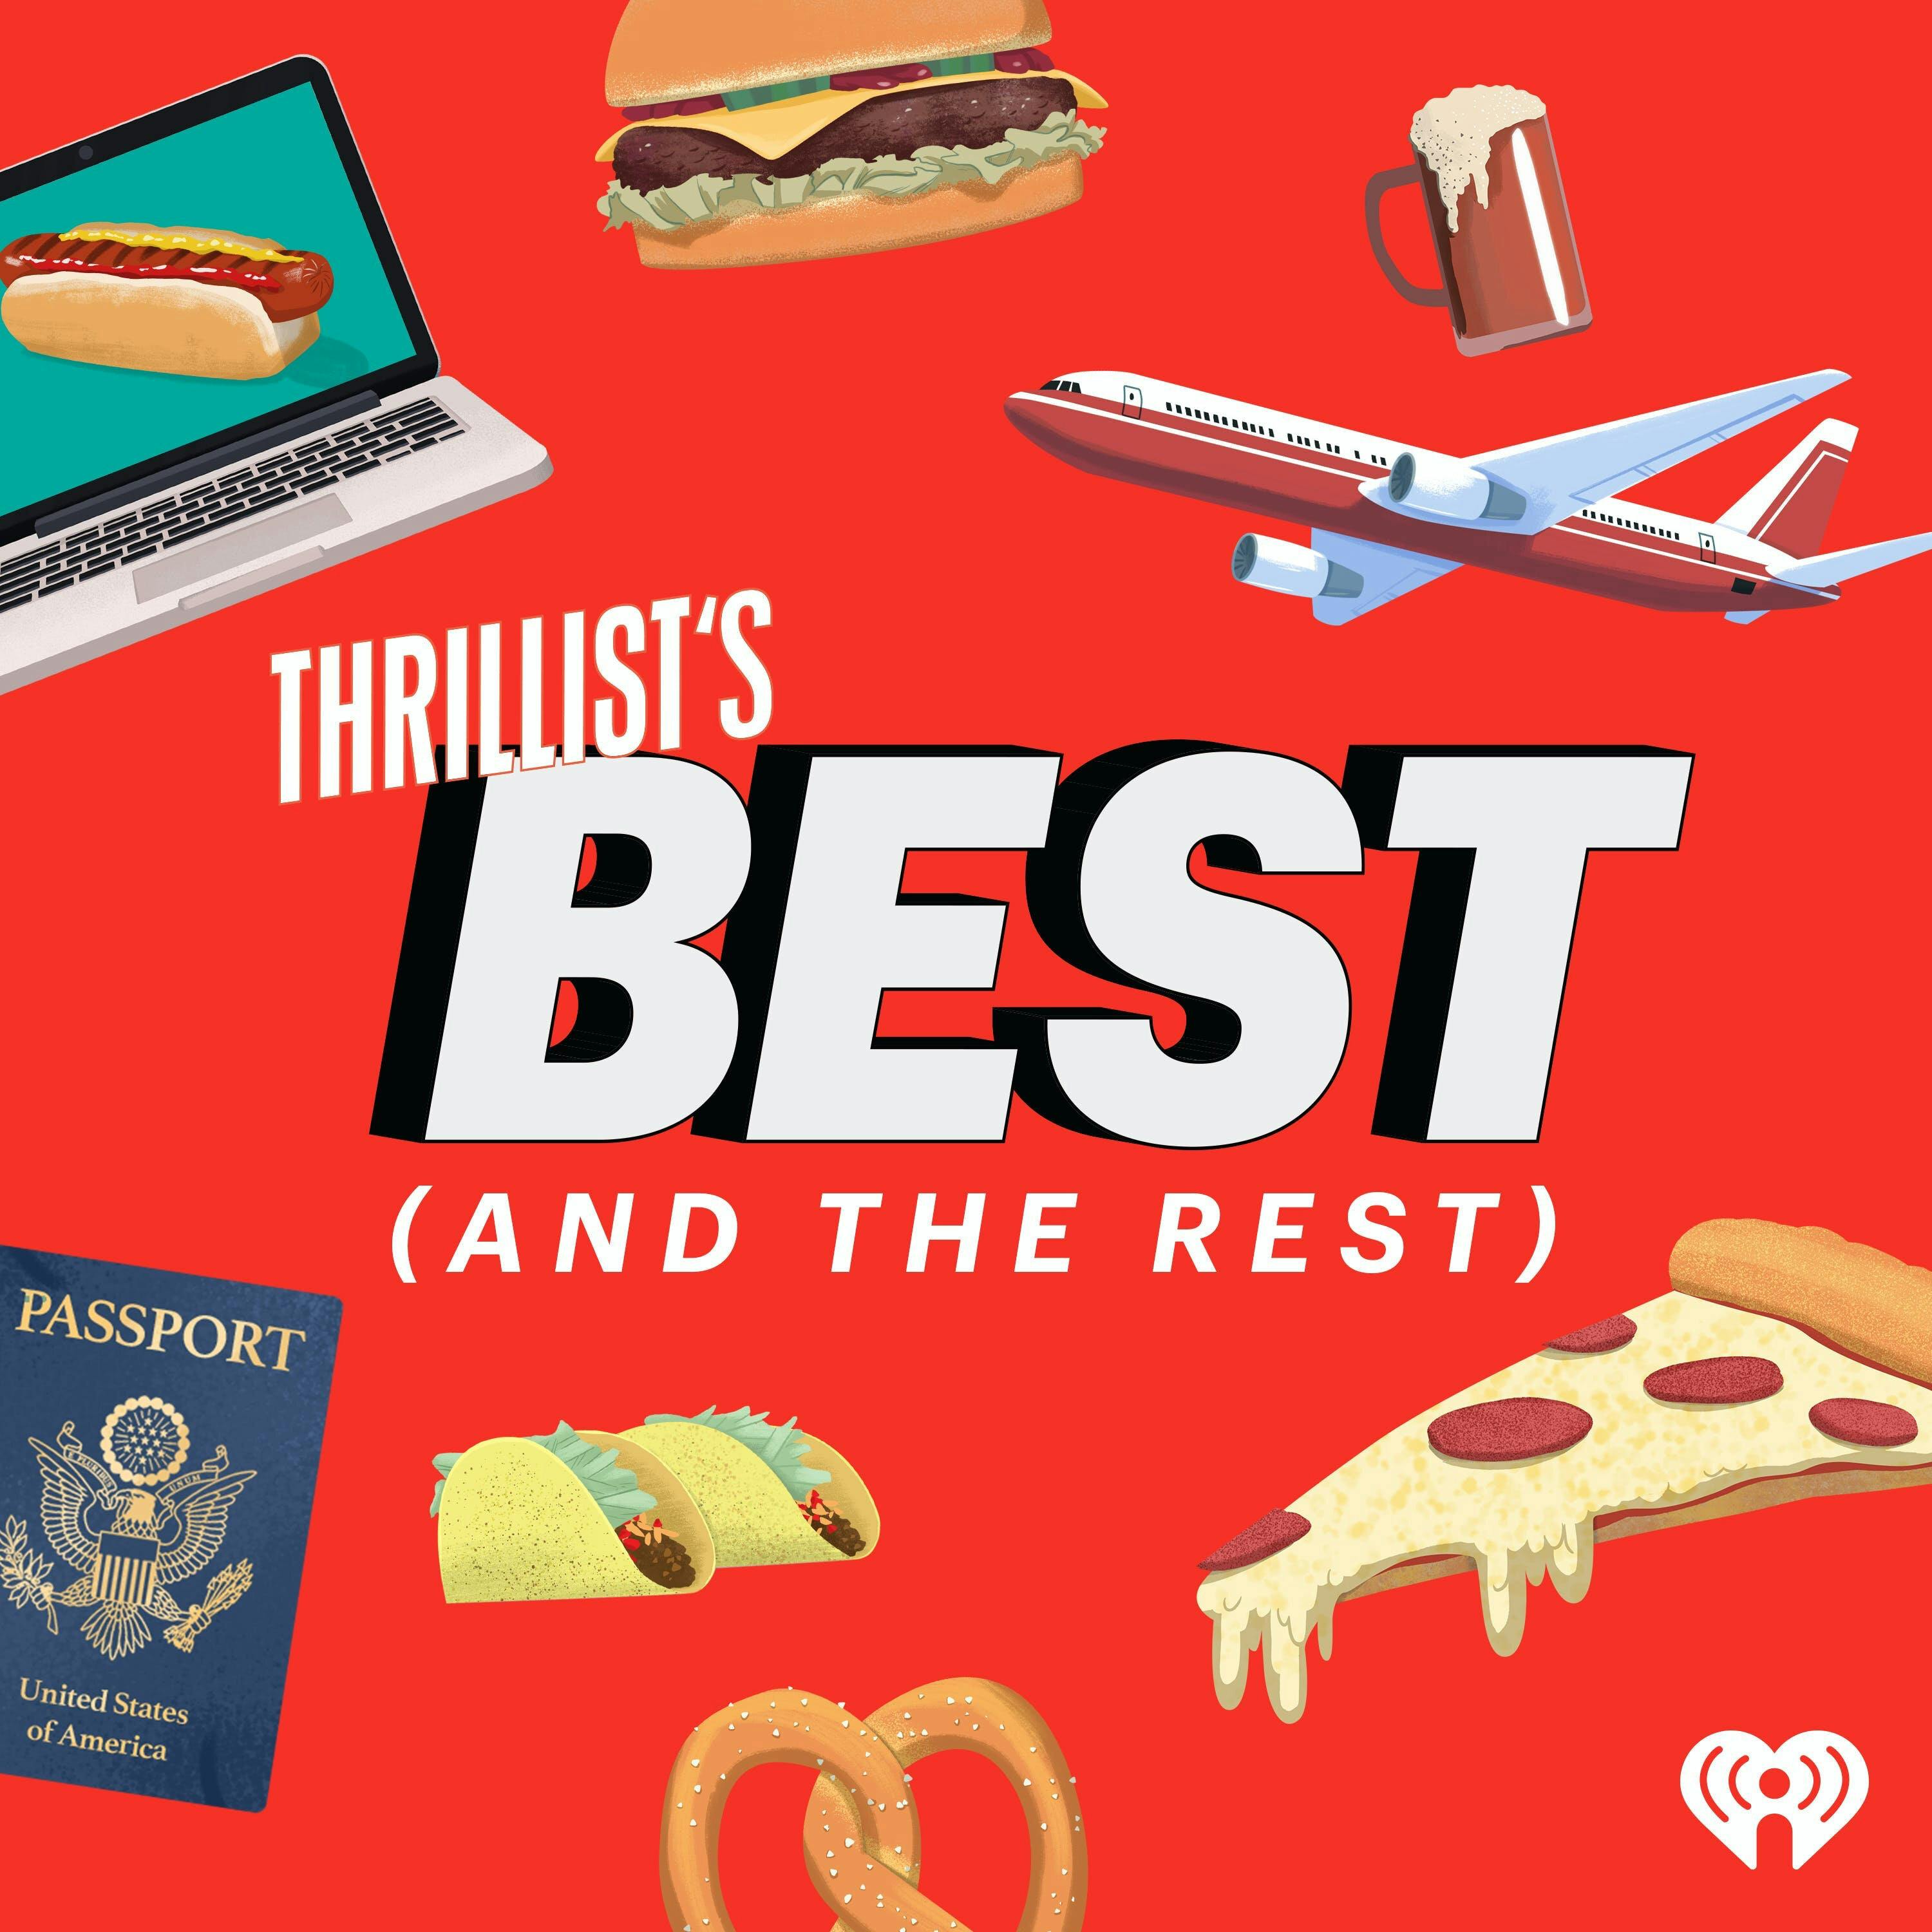 THRILLIST’S BEST: The Best Movie of the Decade is... Complicated